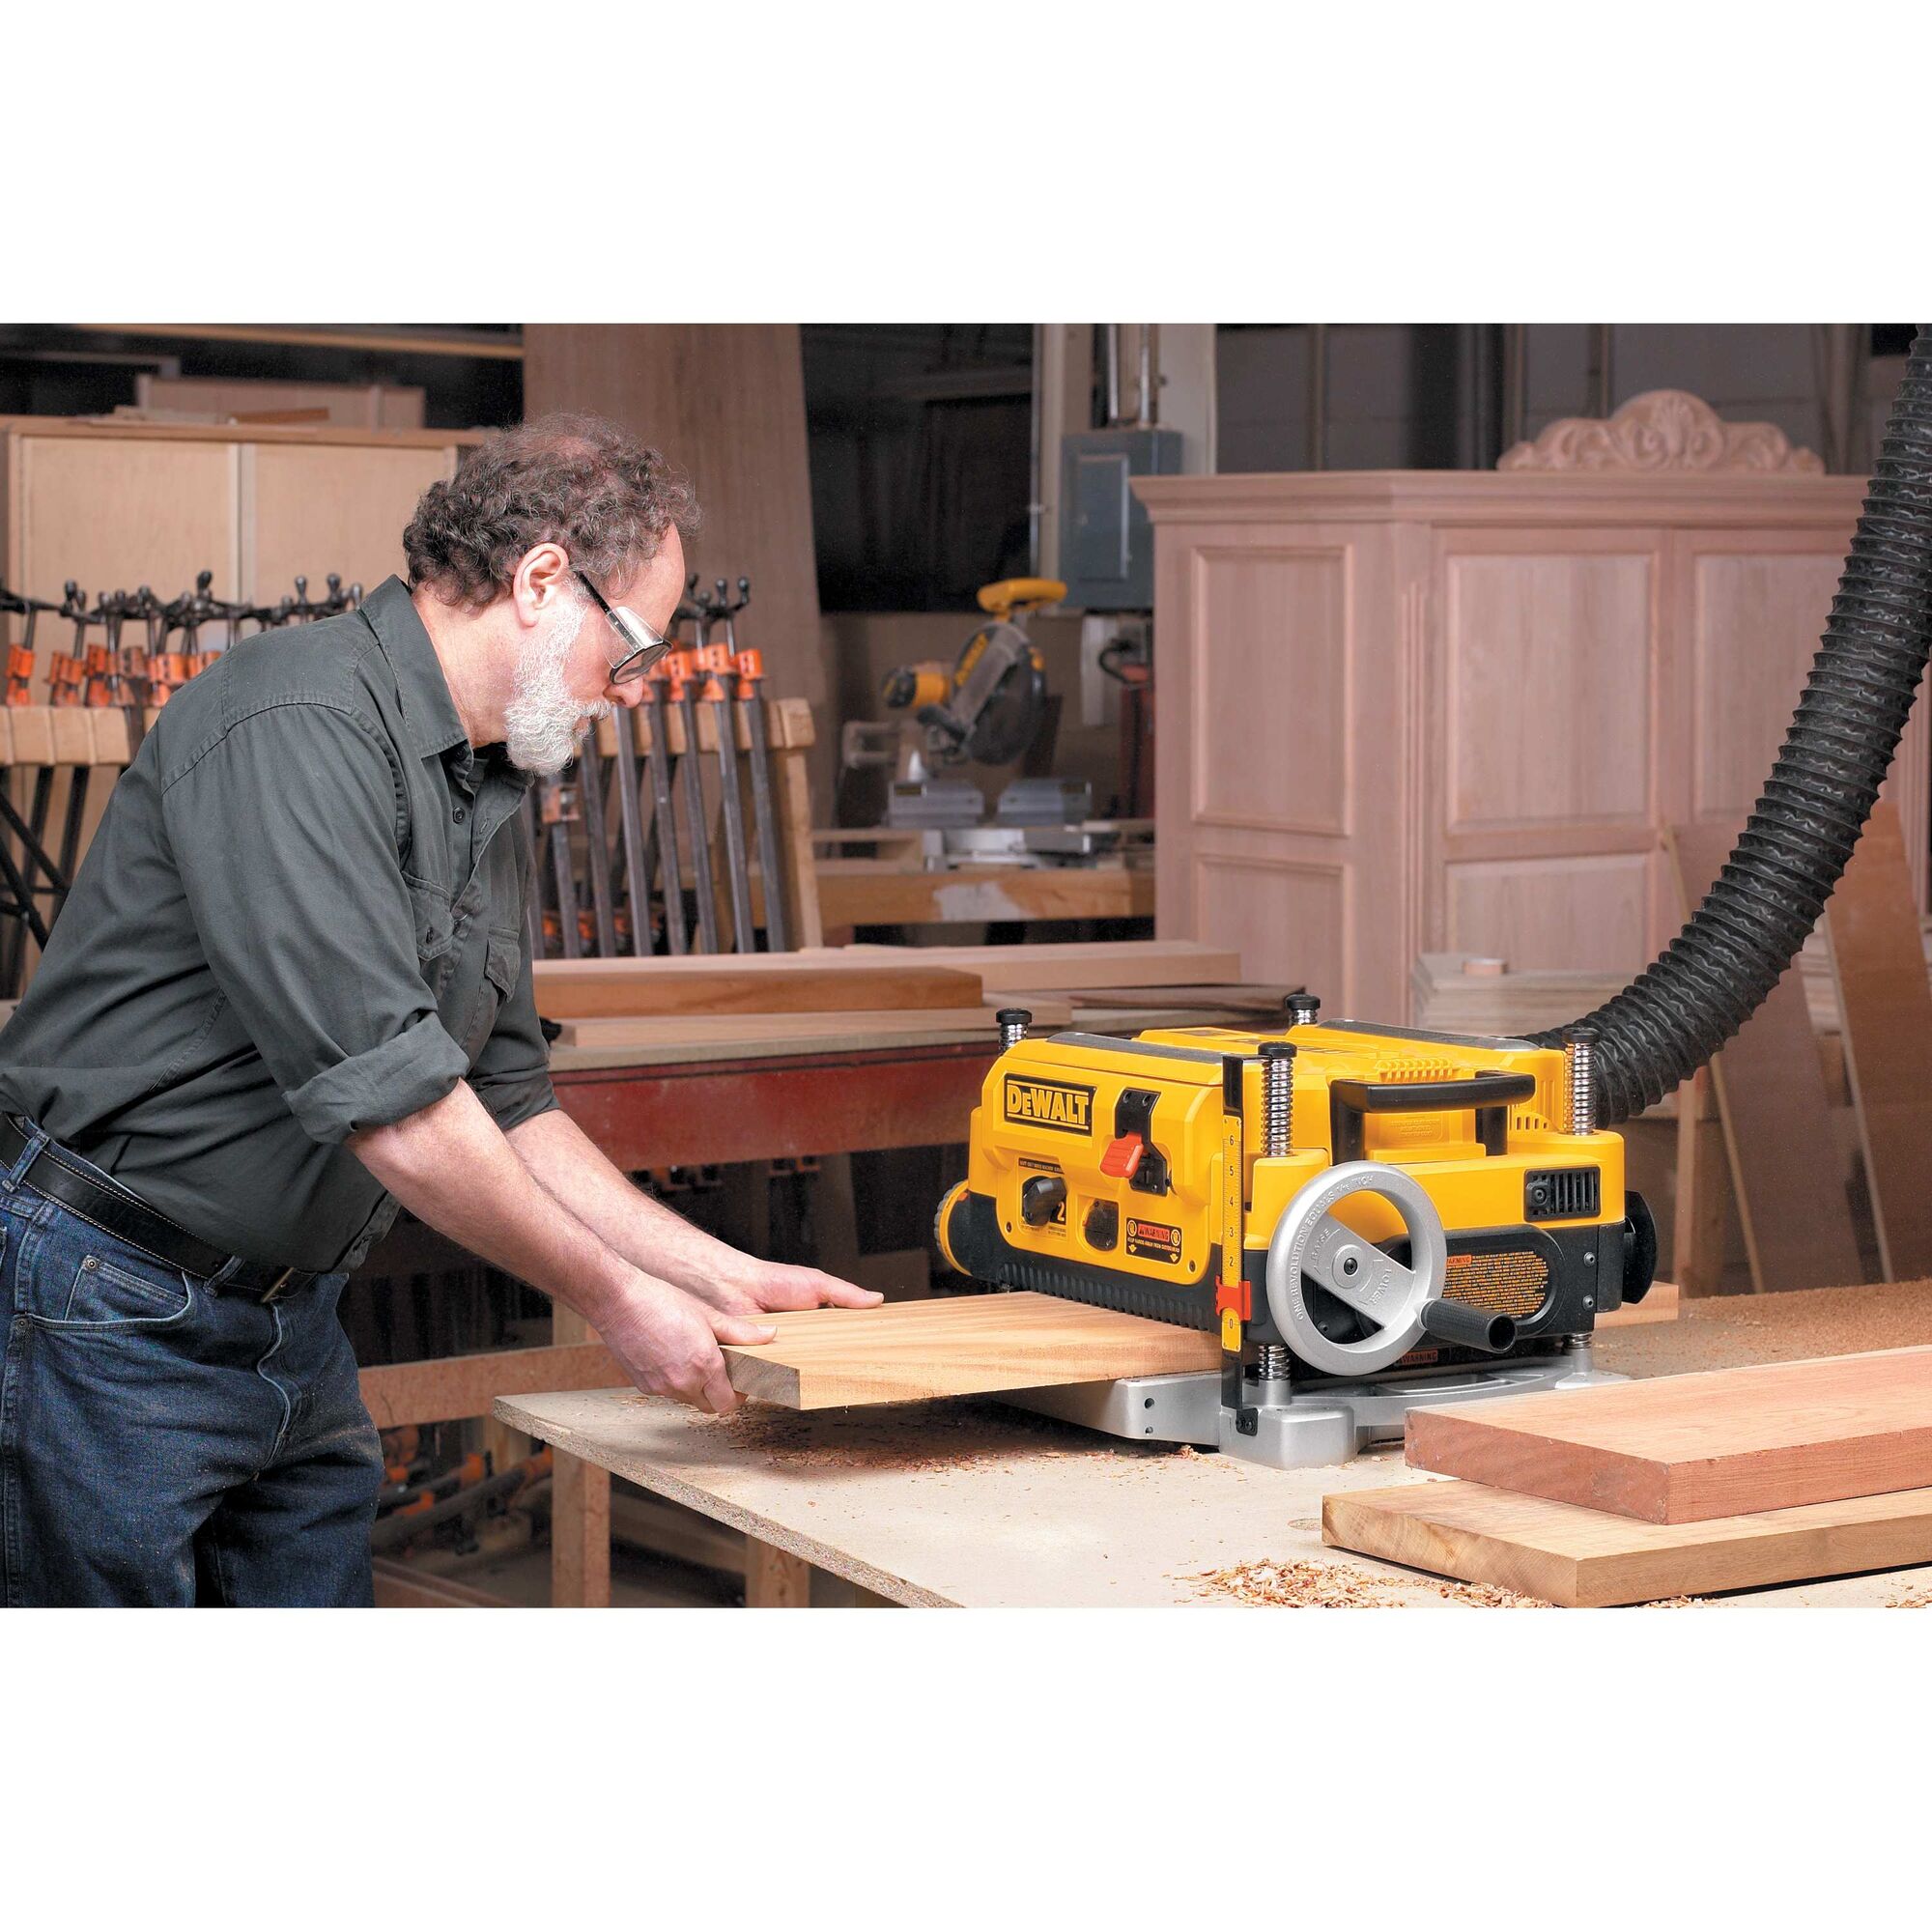 Details about   DEWALT Turret Assembly For DW735 Type1 13” Thickness Planer #DWB-5140010-25 